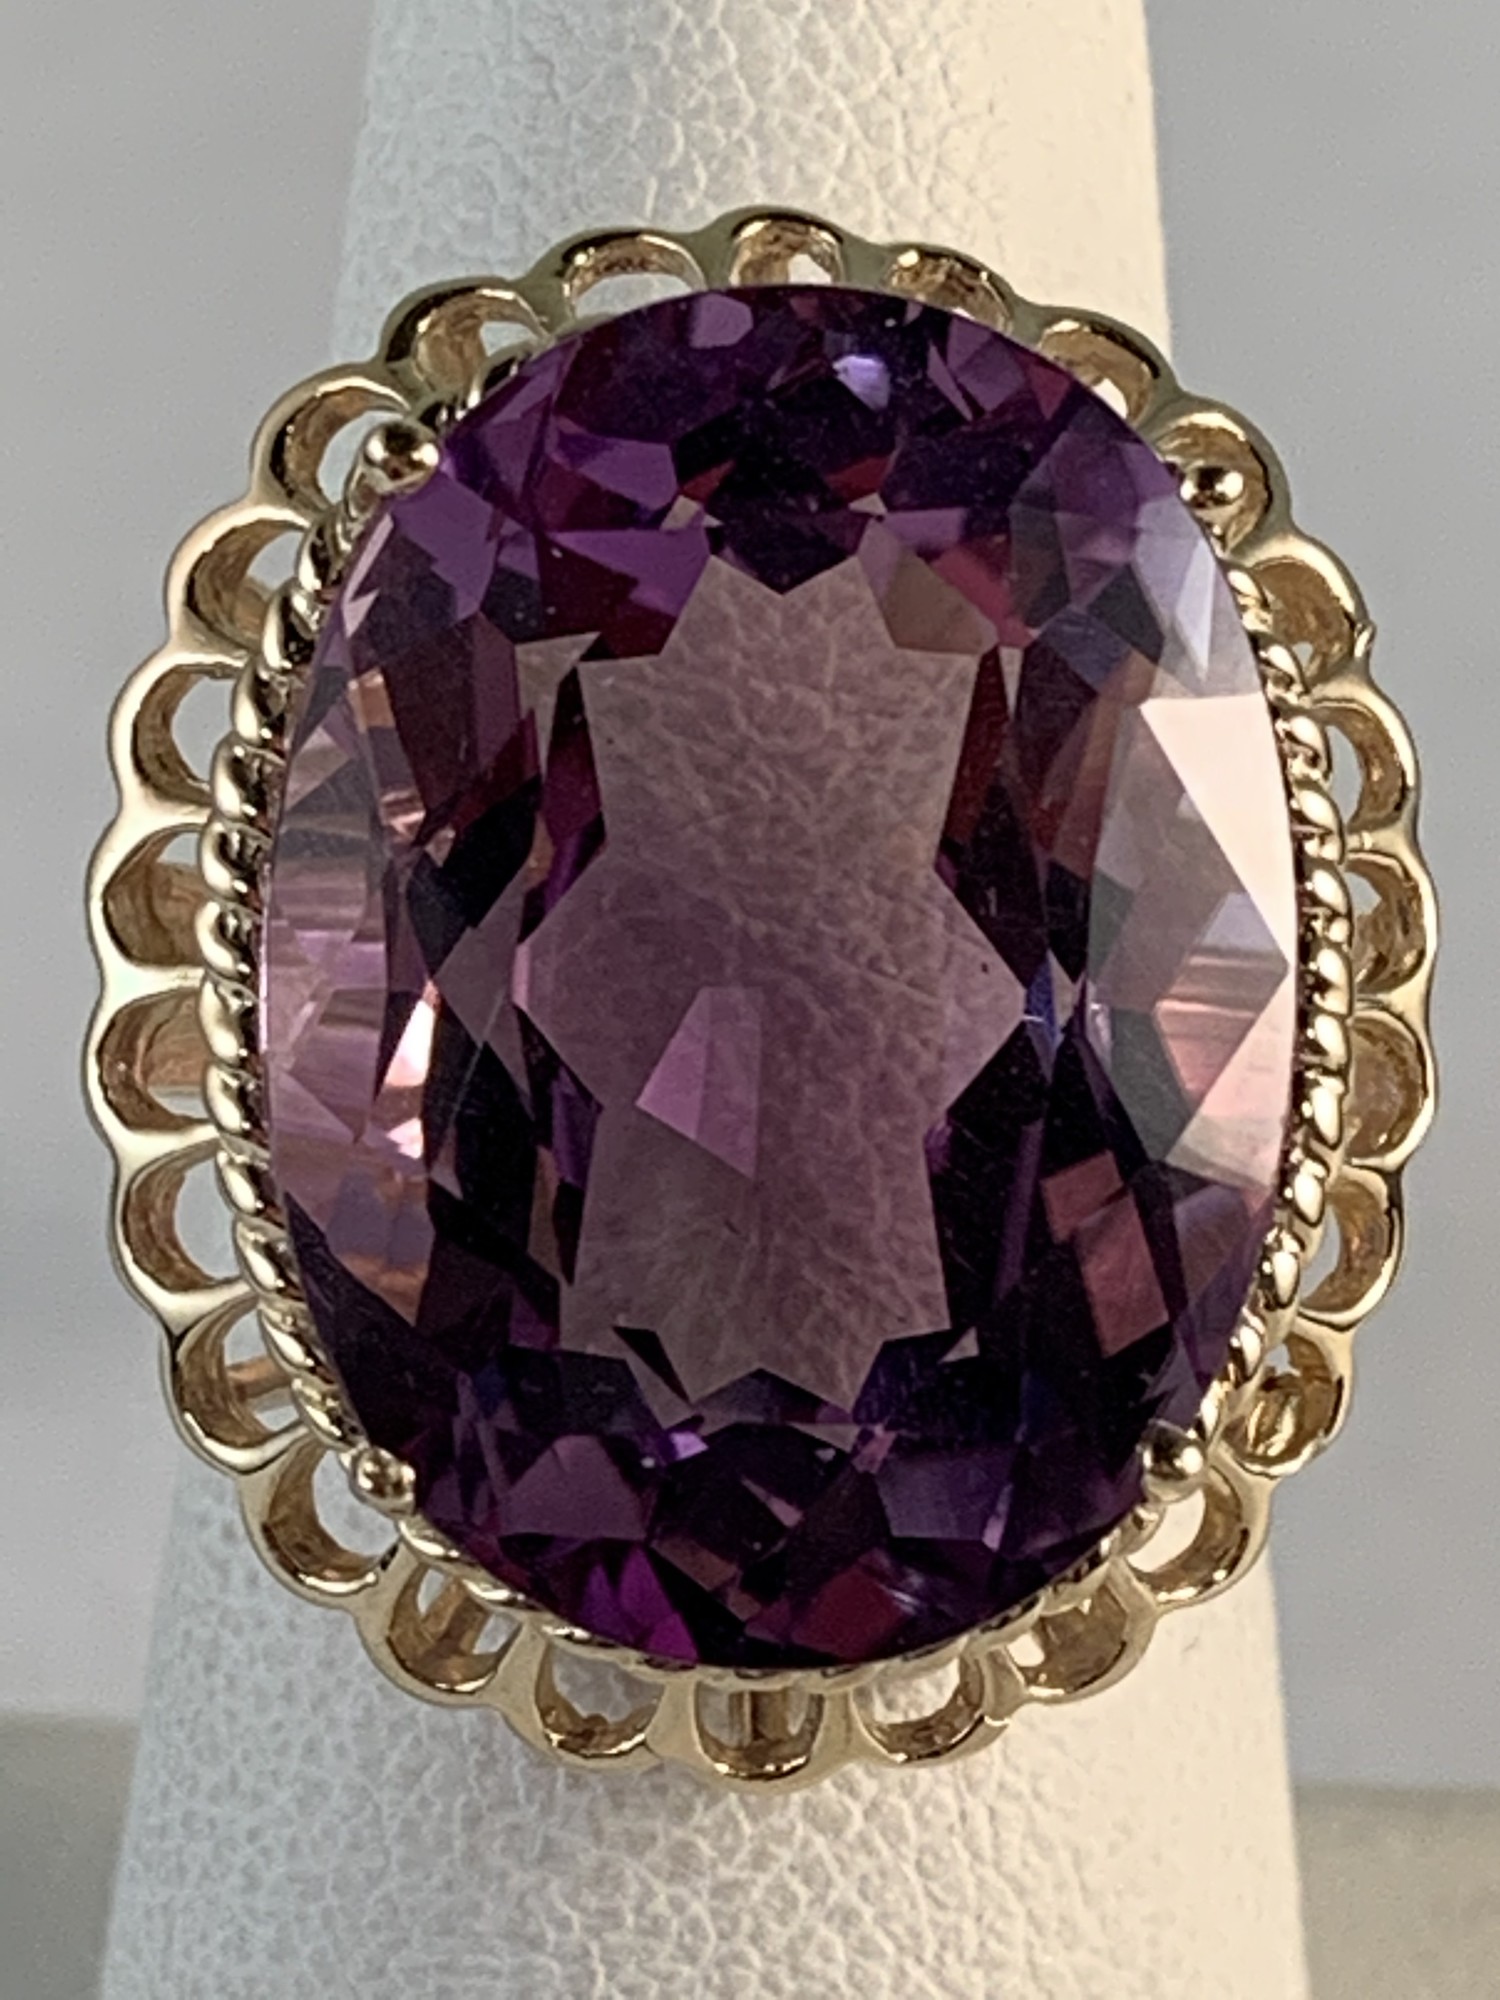 Oval Amethyst With Fluted Bezel Ring
20 x 15mm
14 Karat Yellow Gold
$820